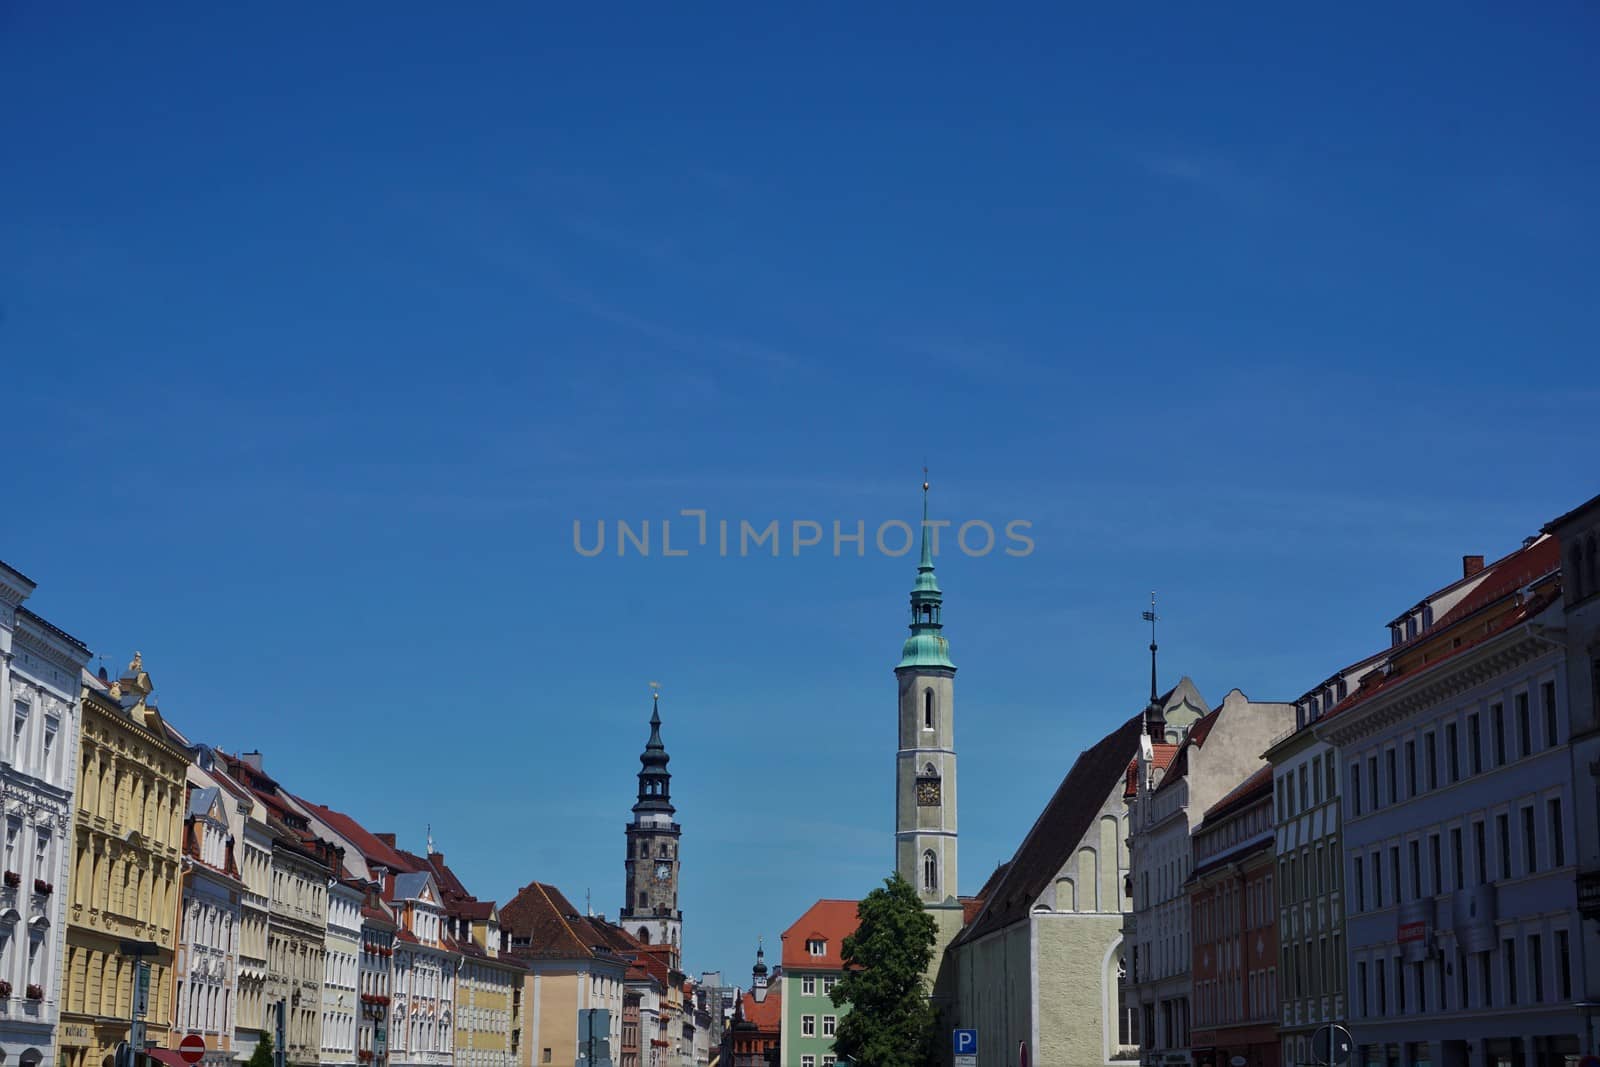 View over the Obermarkt square in the old town of Goerlitz, Germany